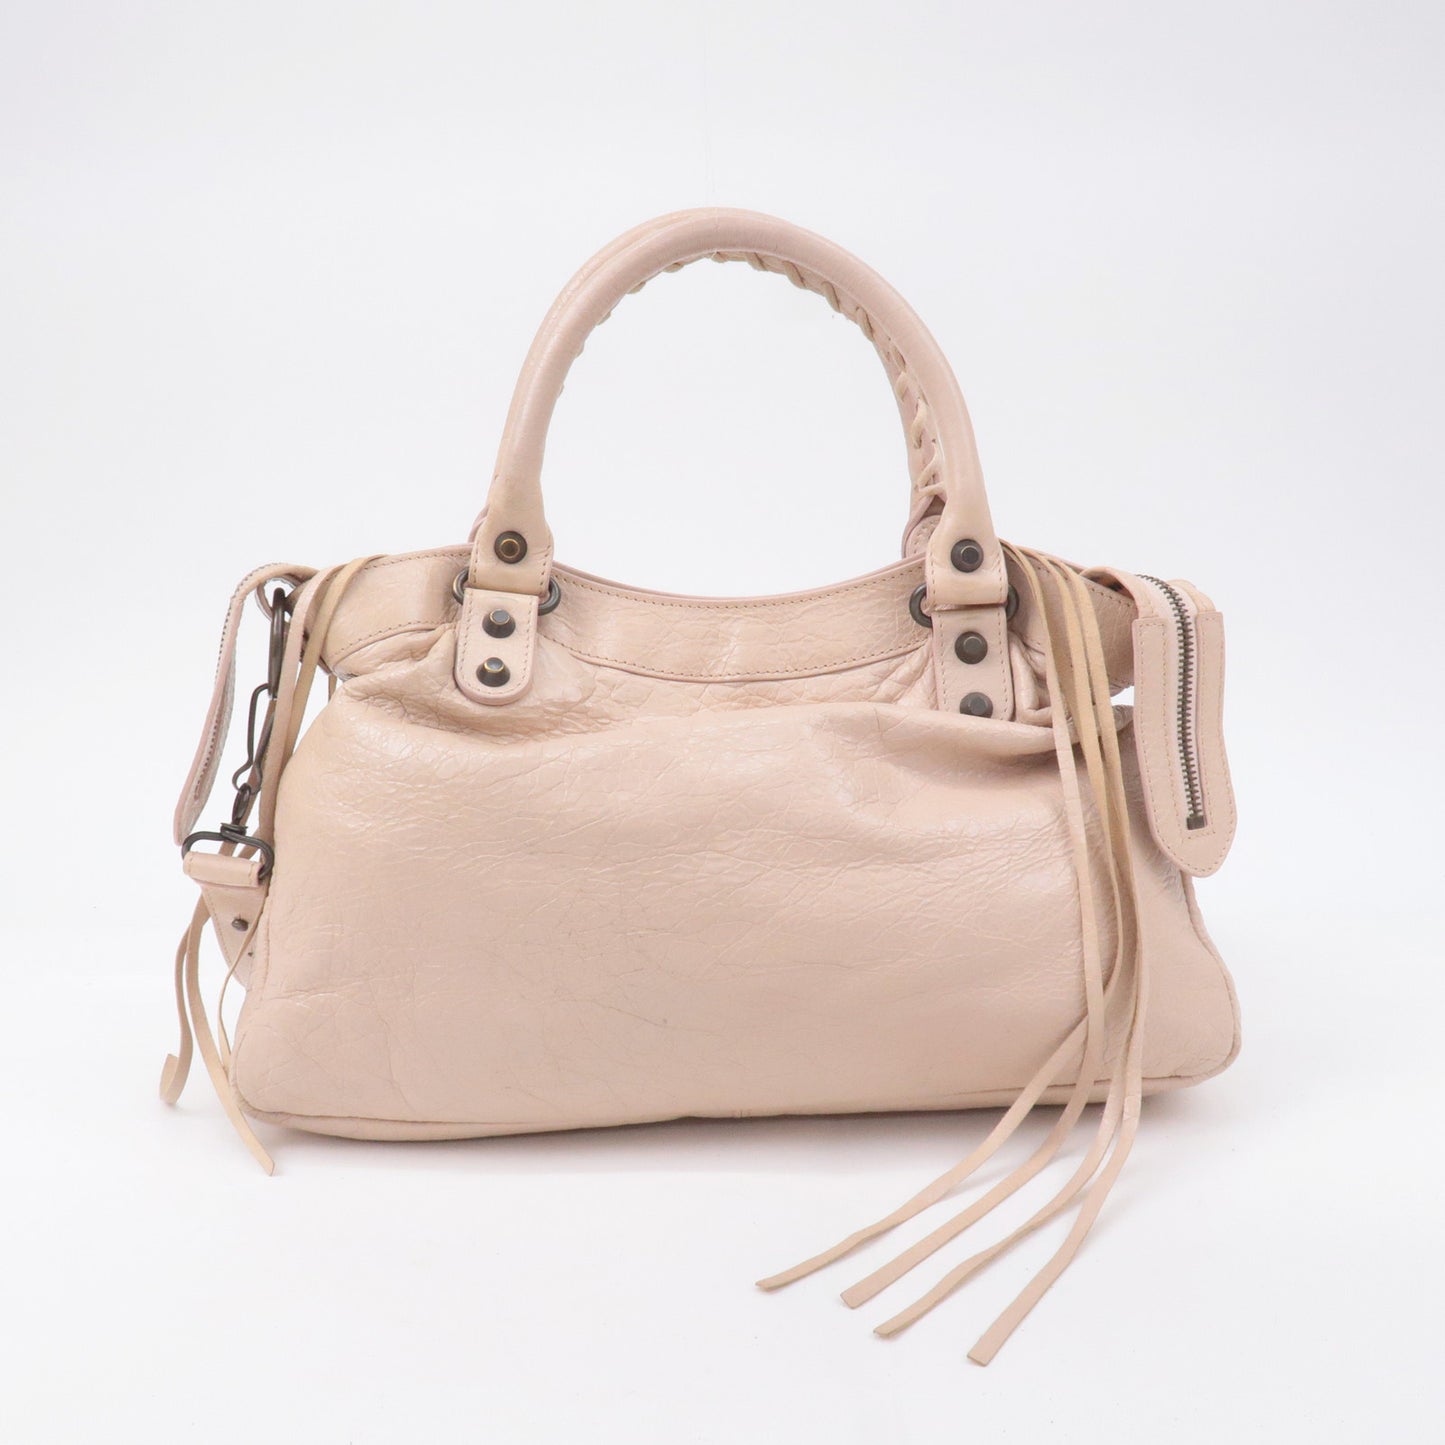 BALENCIAGA The Town Leather 2way Bag Hand Bag Pink Beige 240579